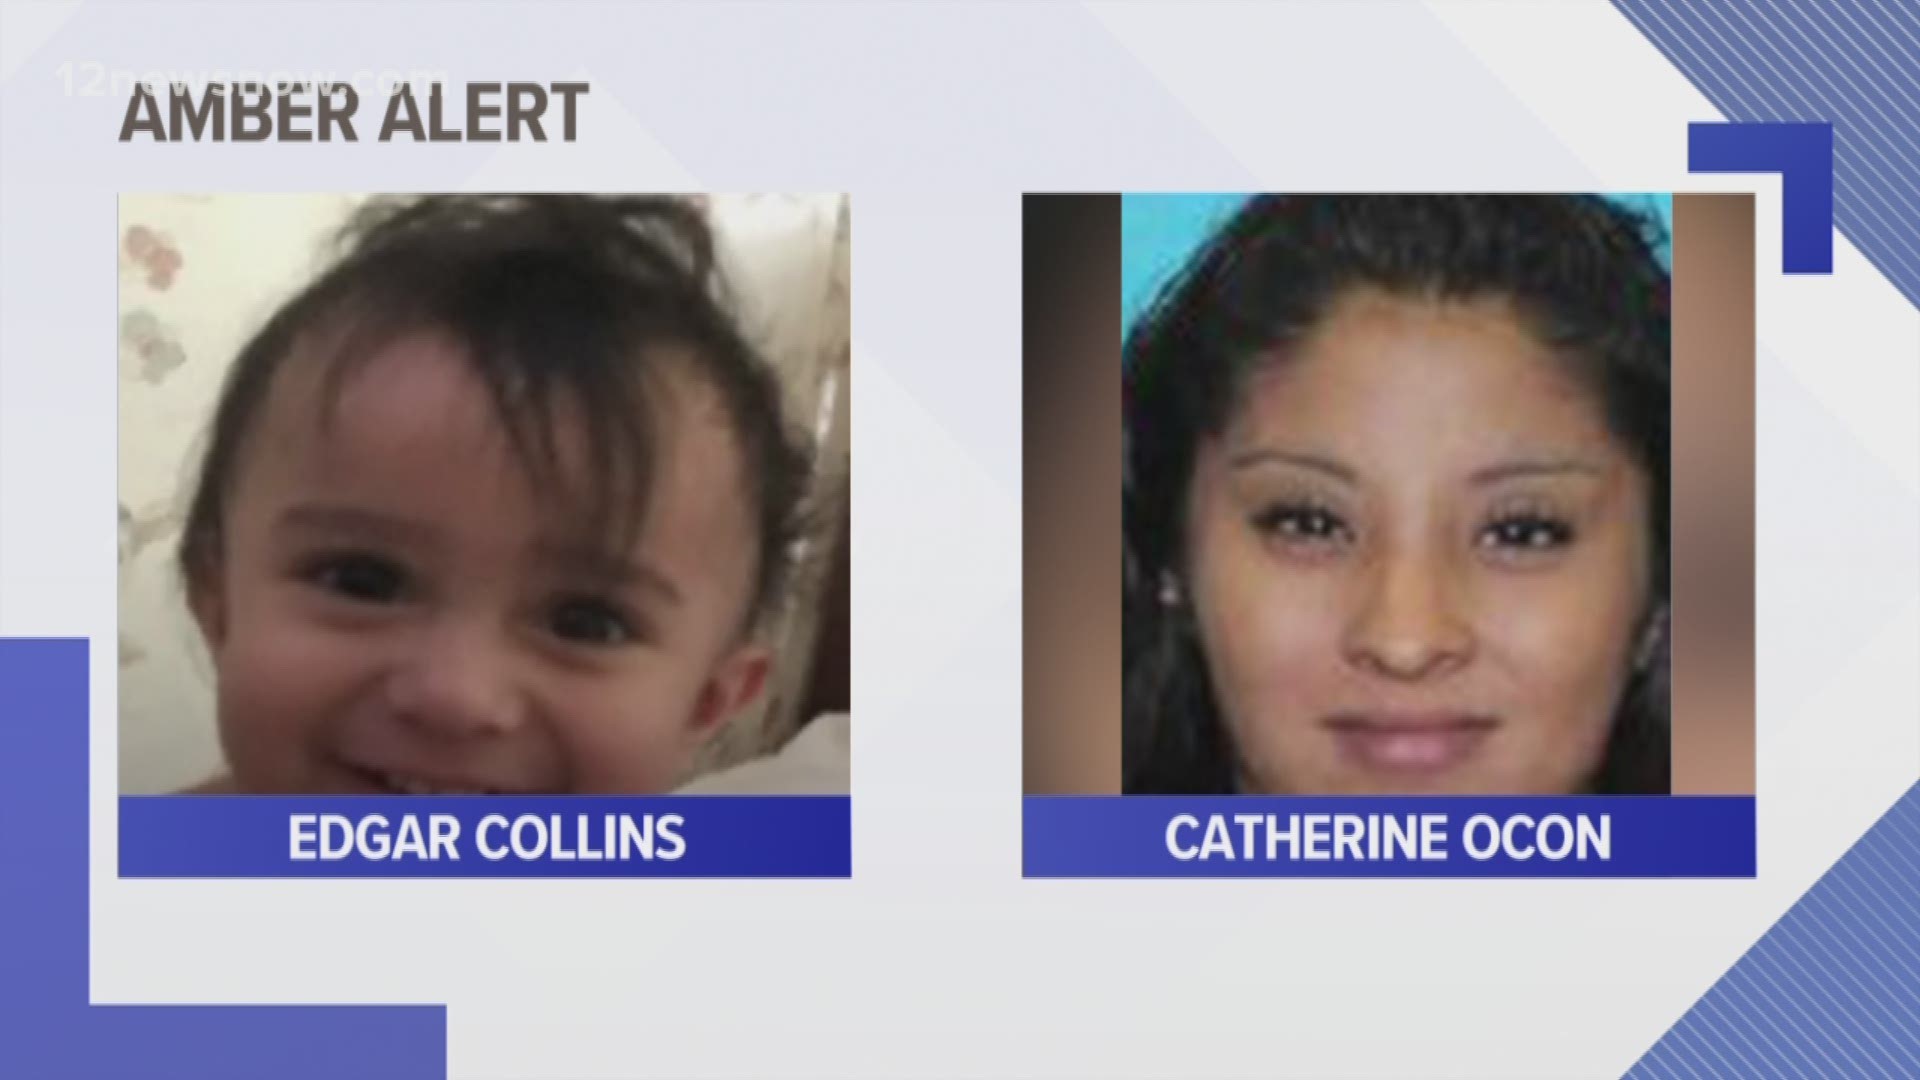 An AMBER Alert was issued for Edgar Collins on Saturday